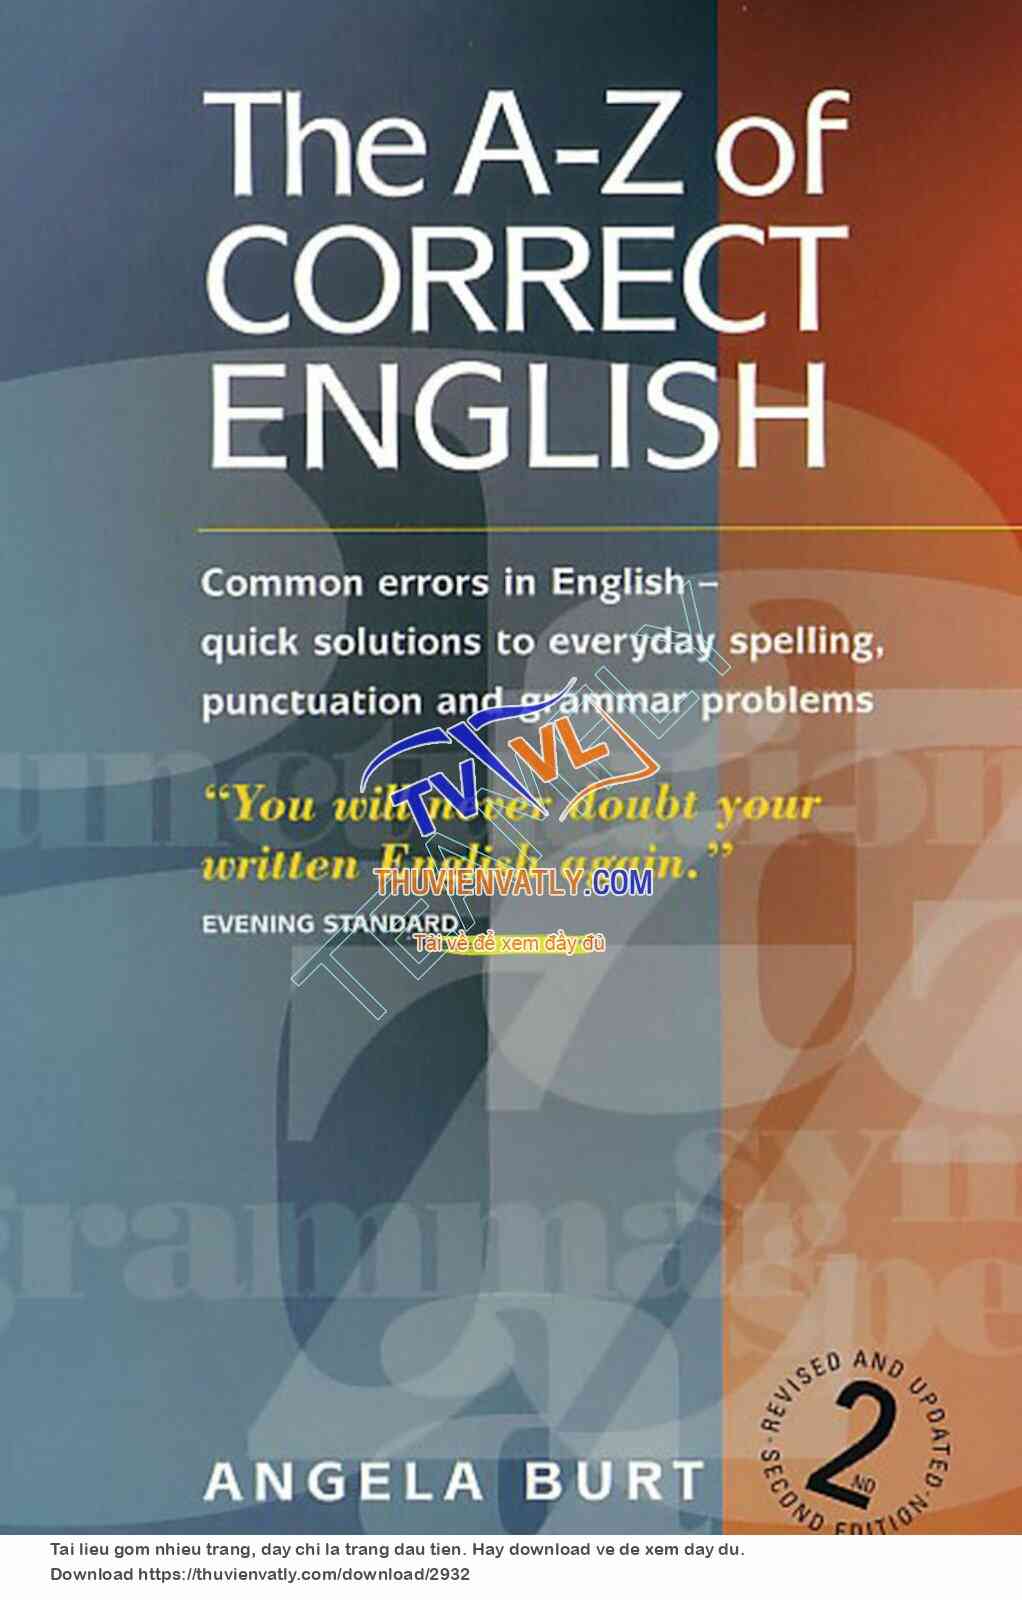 Common errors in English: The A to Z of Correct English (ANGELA BURT)